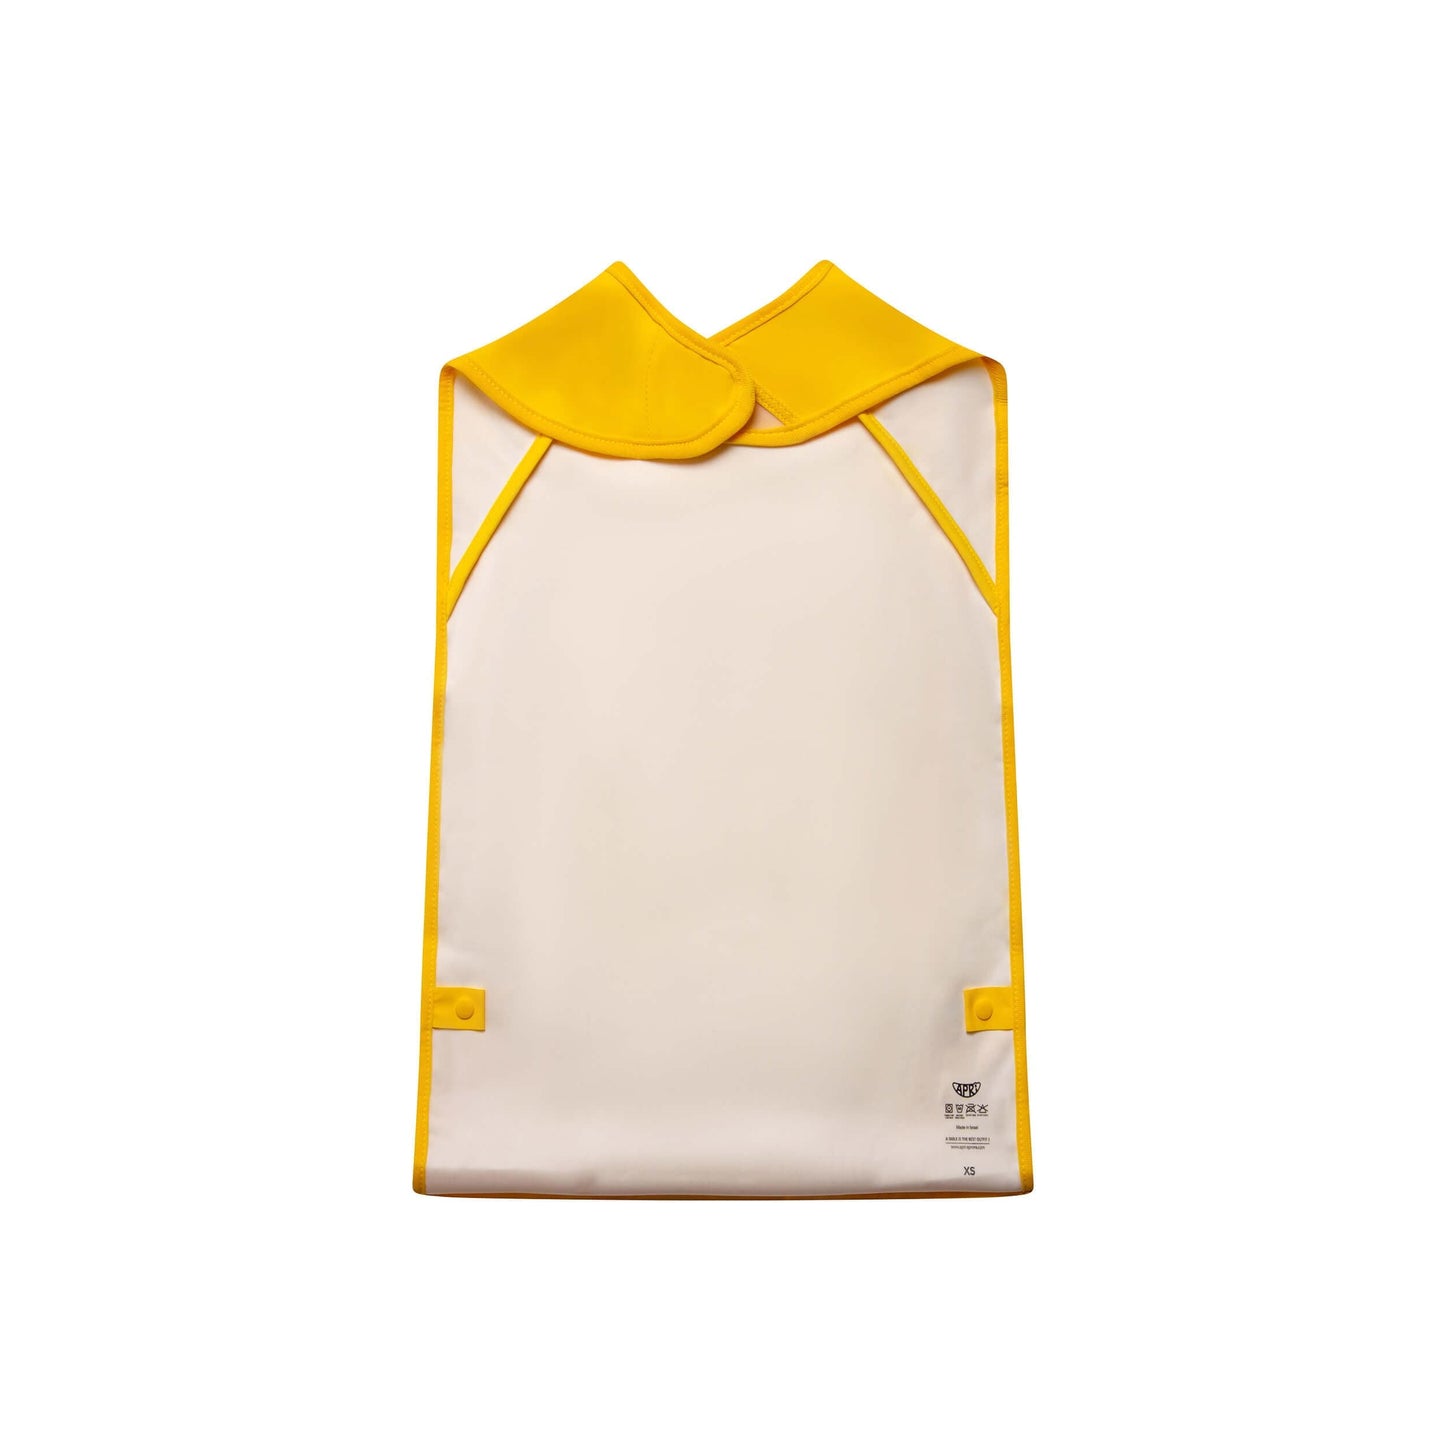 Sleeveless waterproof bib for kids, teens, and adults. Apri bibs bold yellow with food pocket and innovative silicone fastener.